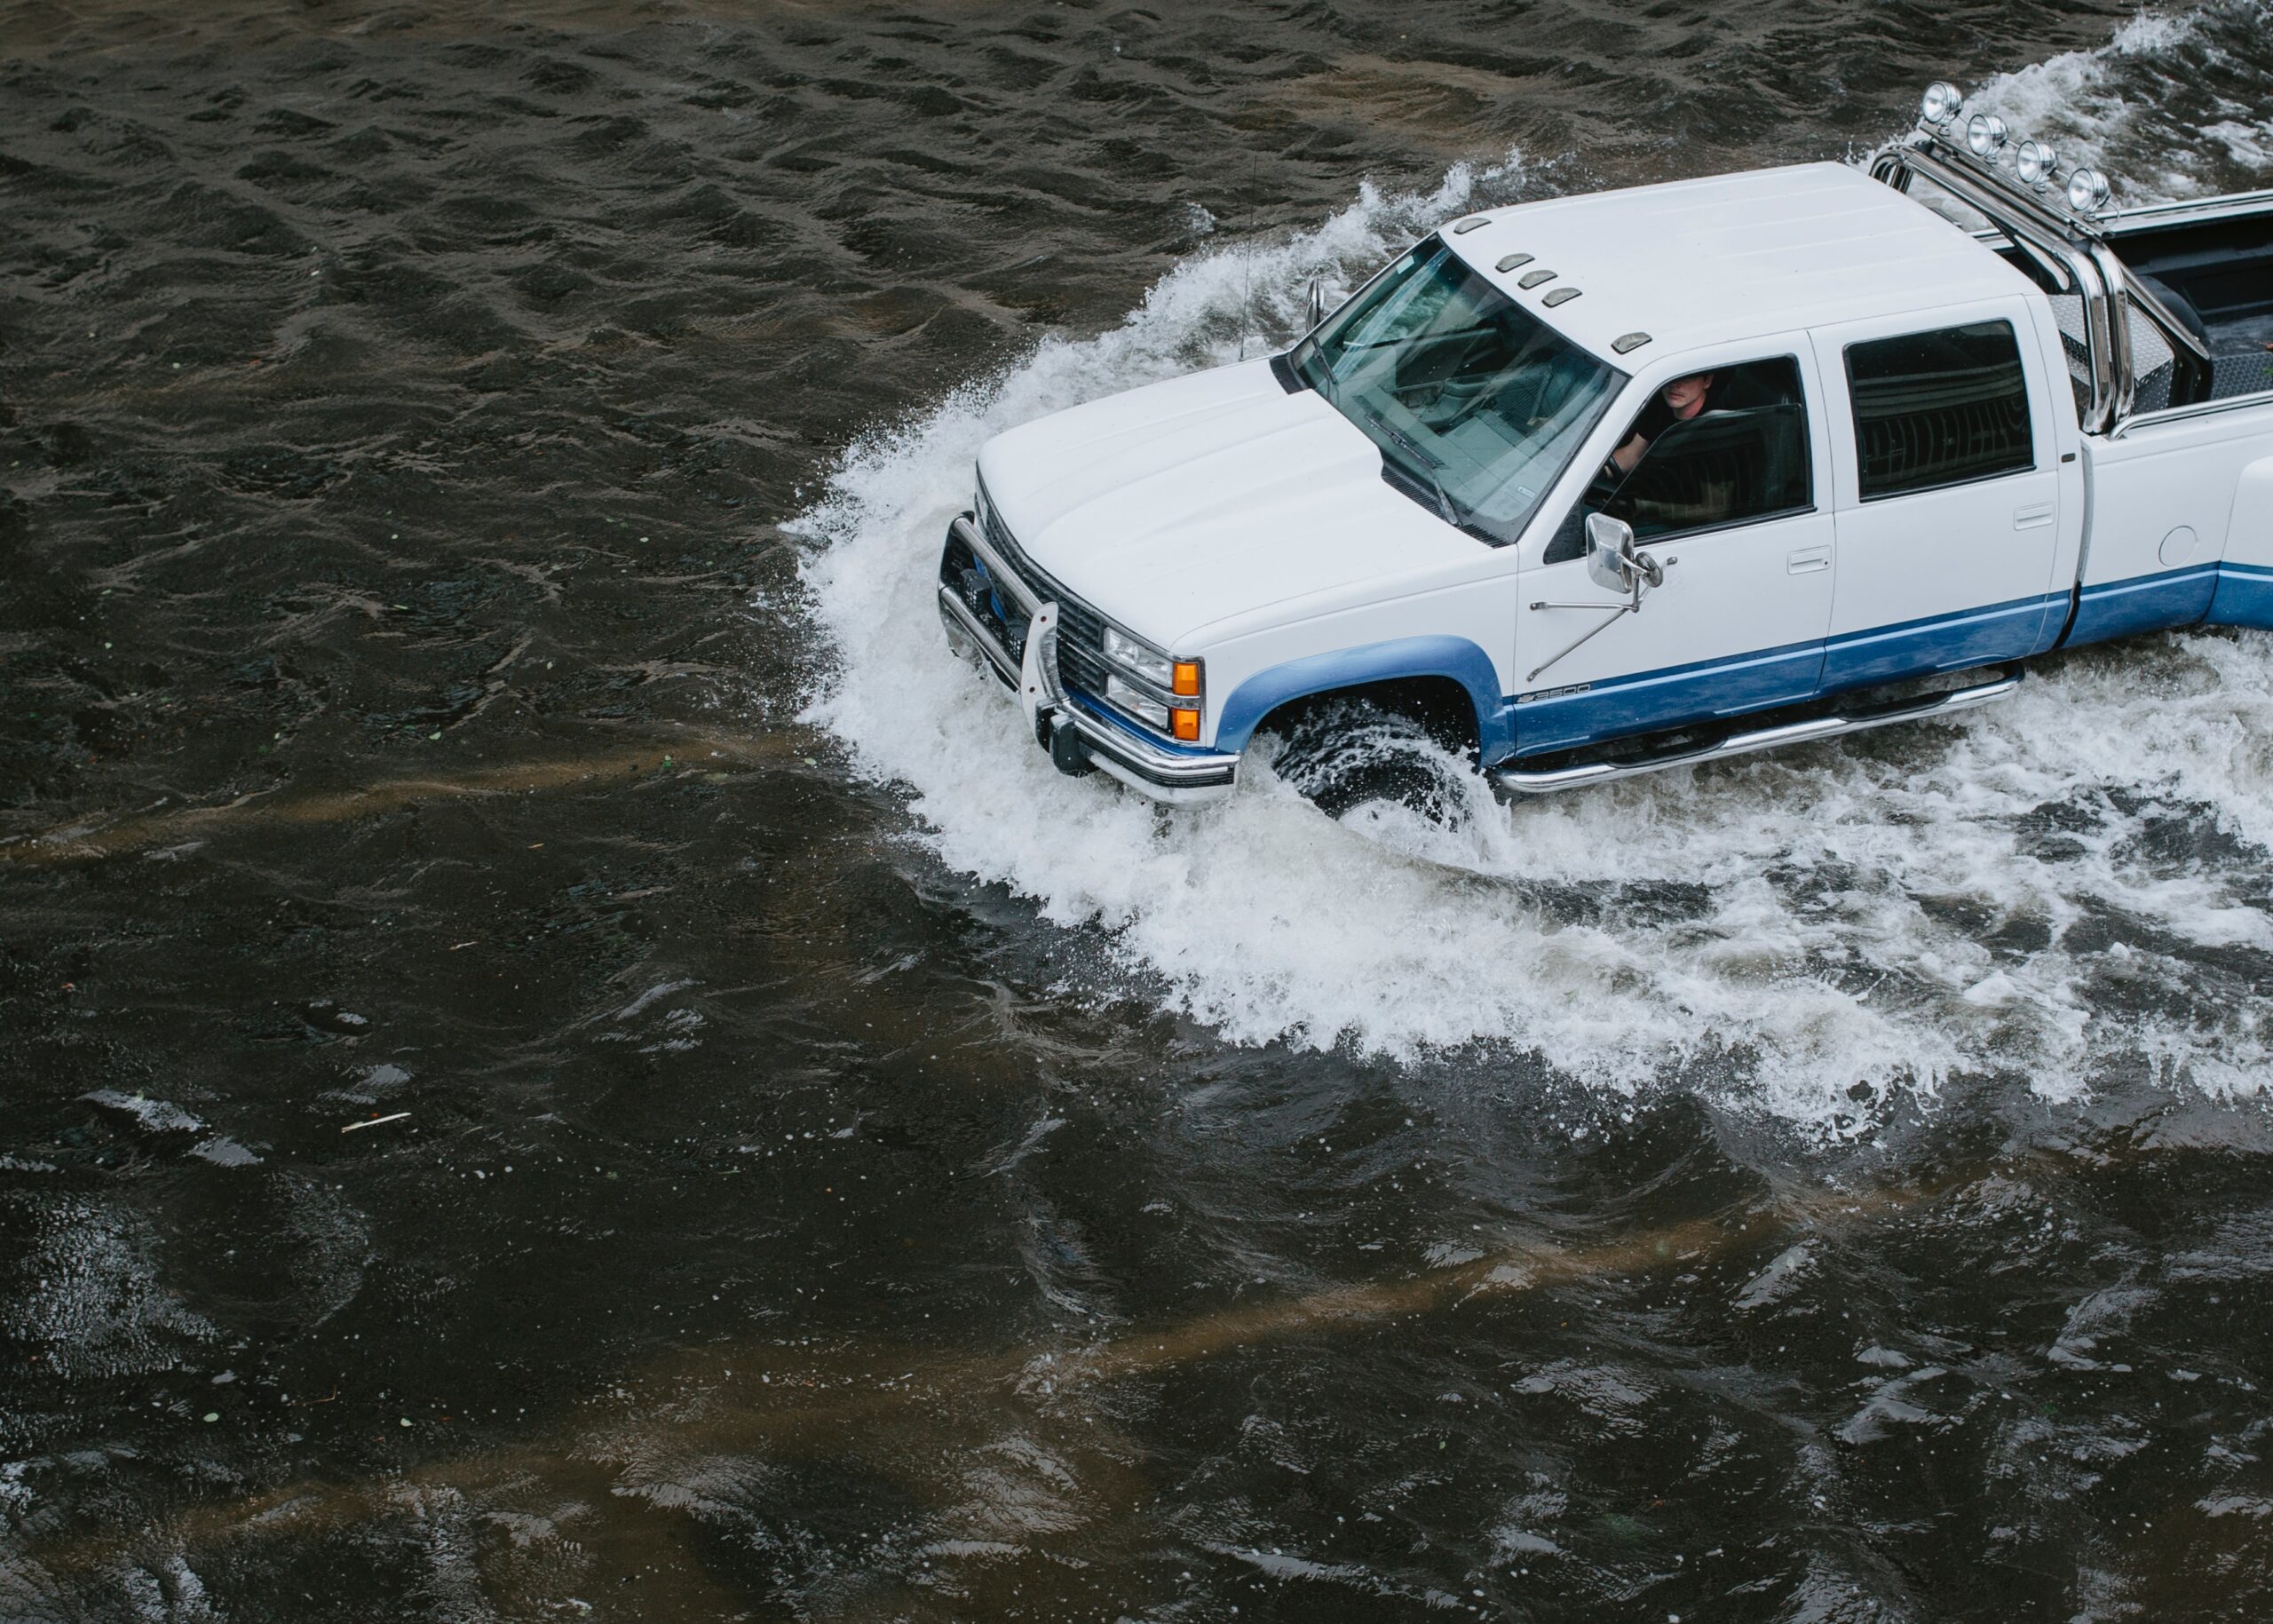 White Chevy Pickup Driving Through A Flooded Road. The Driver peers at the camera warily